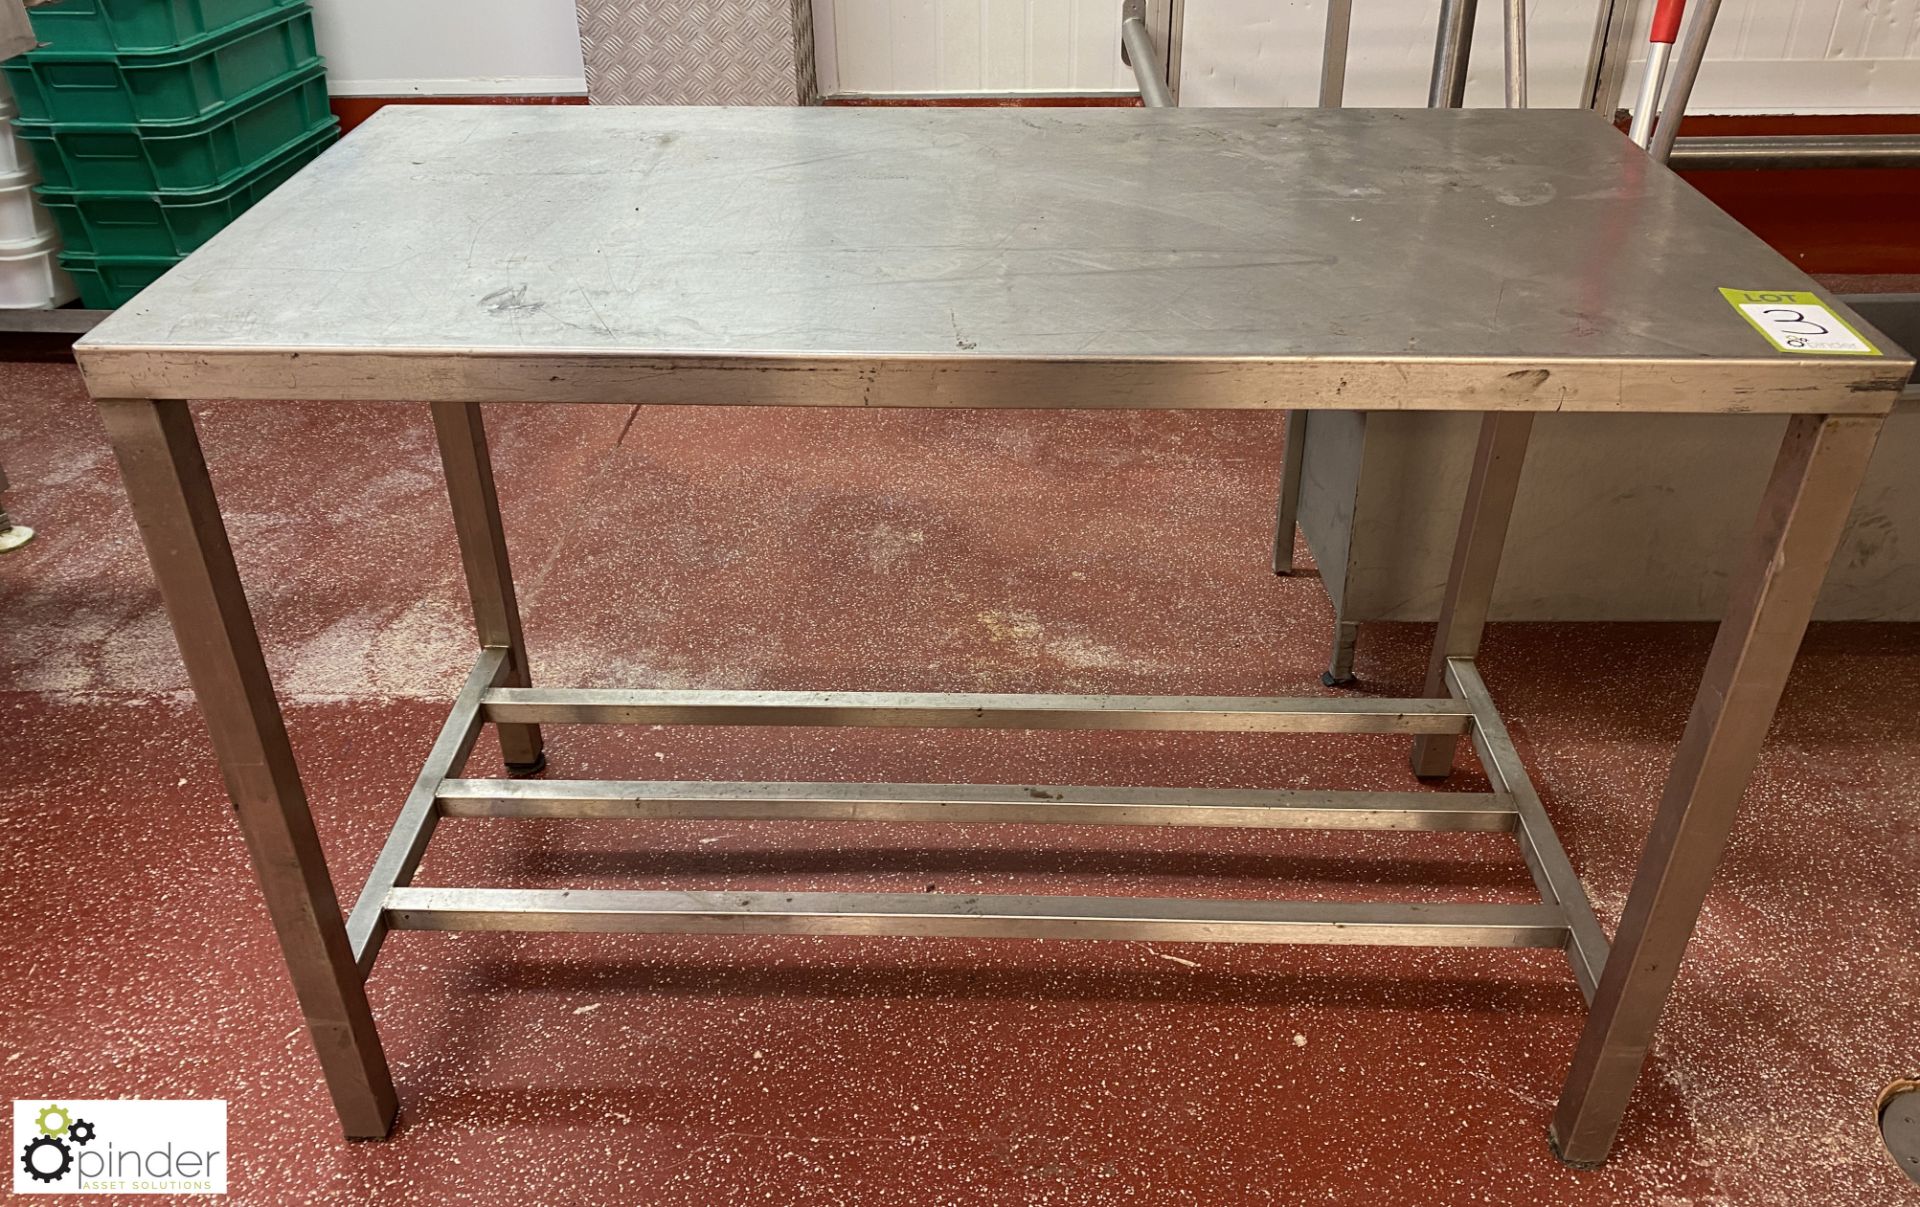 Stainless steel Preparation Table, 1200mm x 600mm x 820mm (Lift Out Fee: £10 plus VAT)